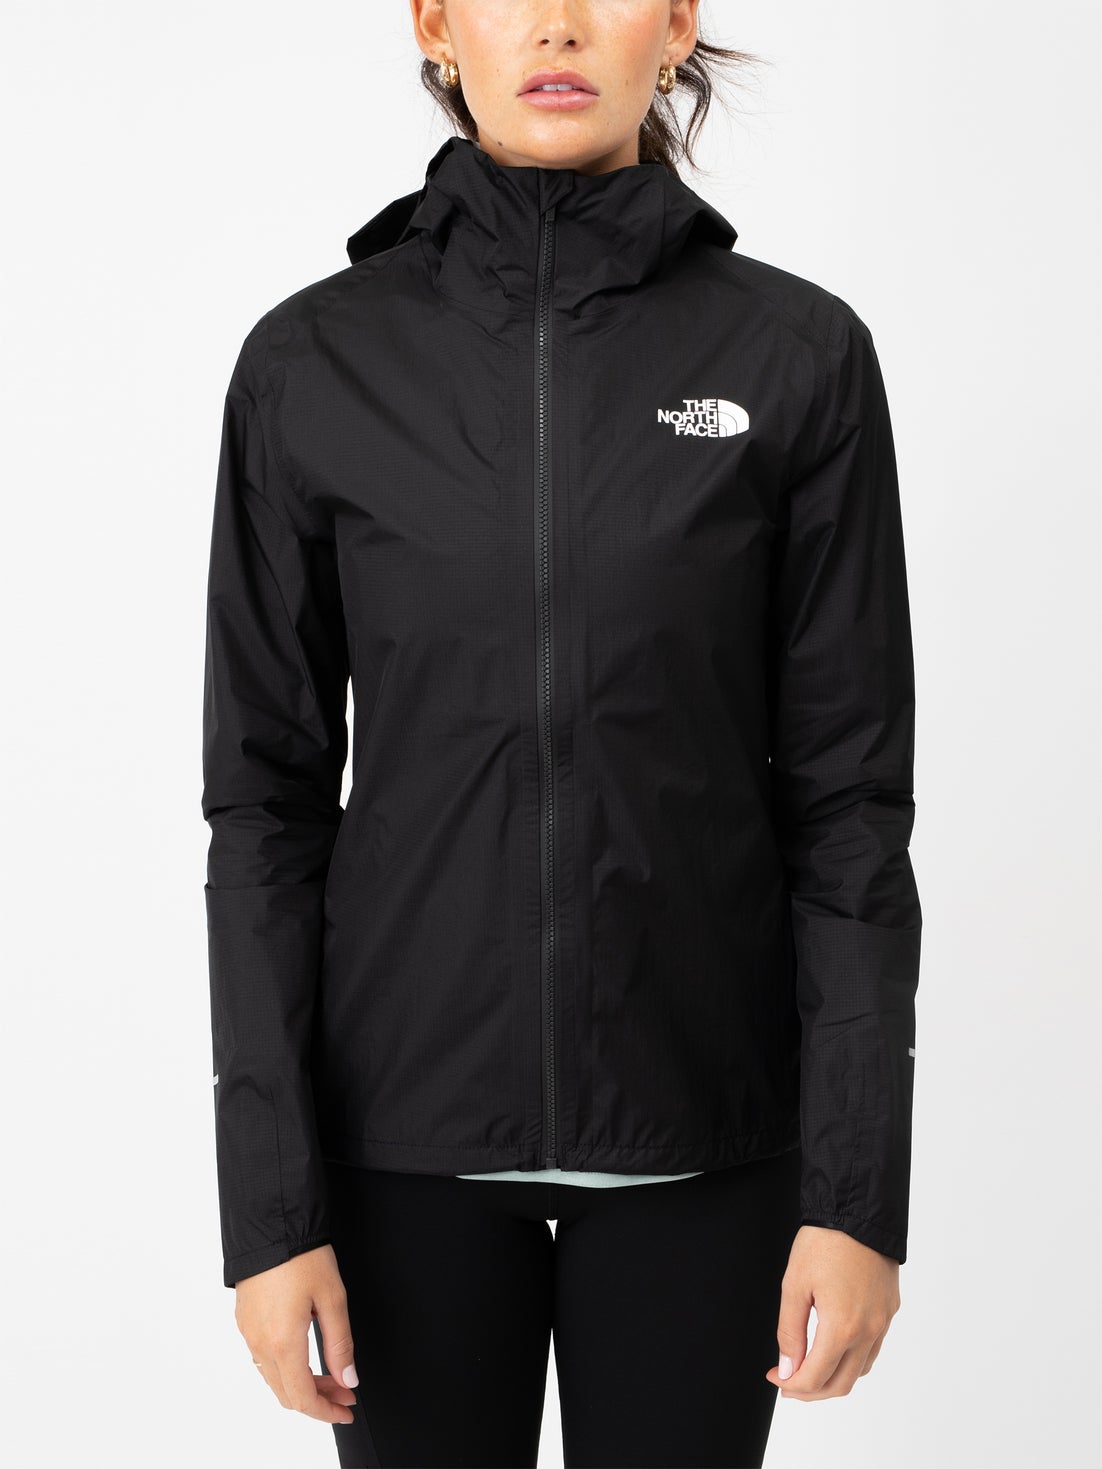 The North Face Women's First Dawn Packable Jacket | Running Warehouse